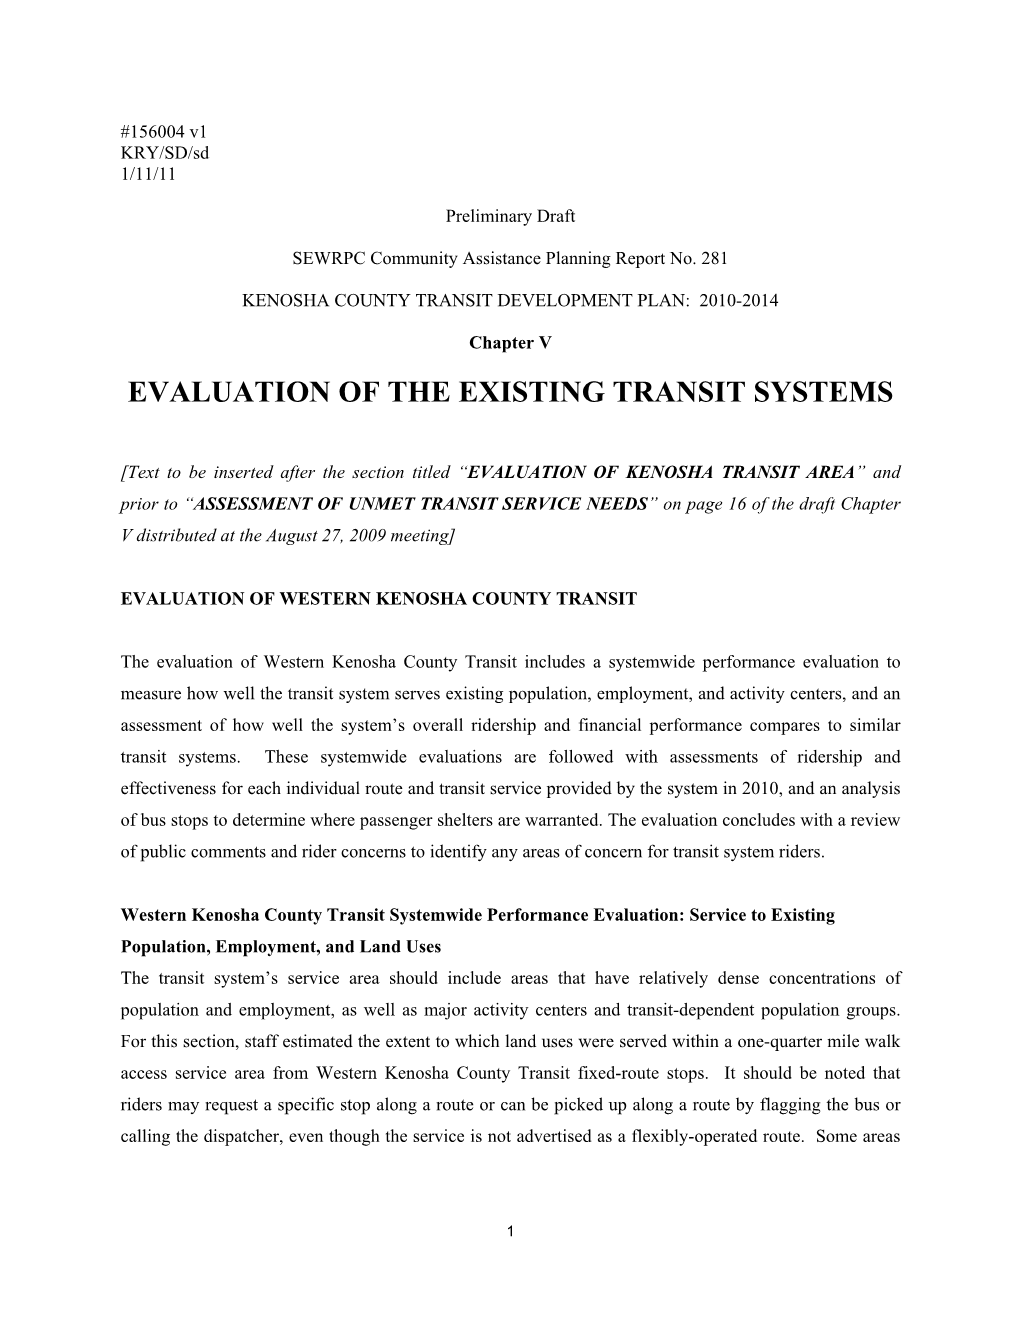 Evaluation of the Existing Transit Systems